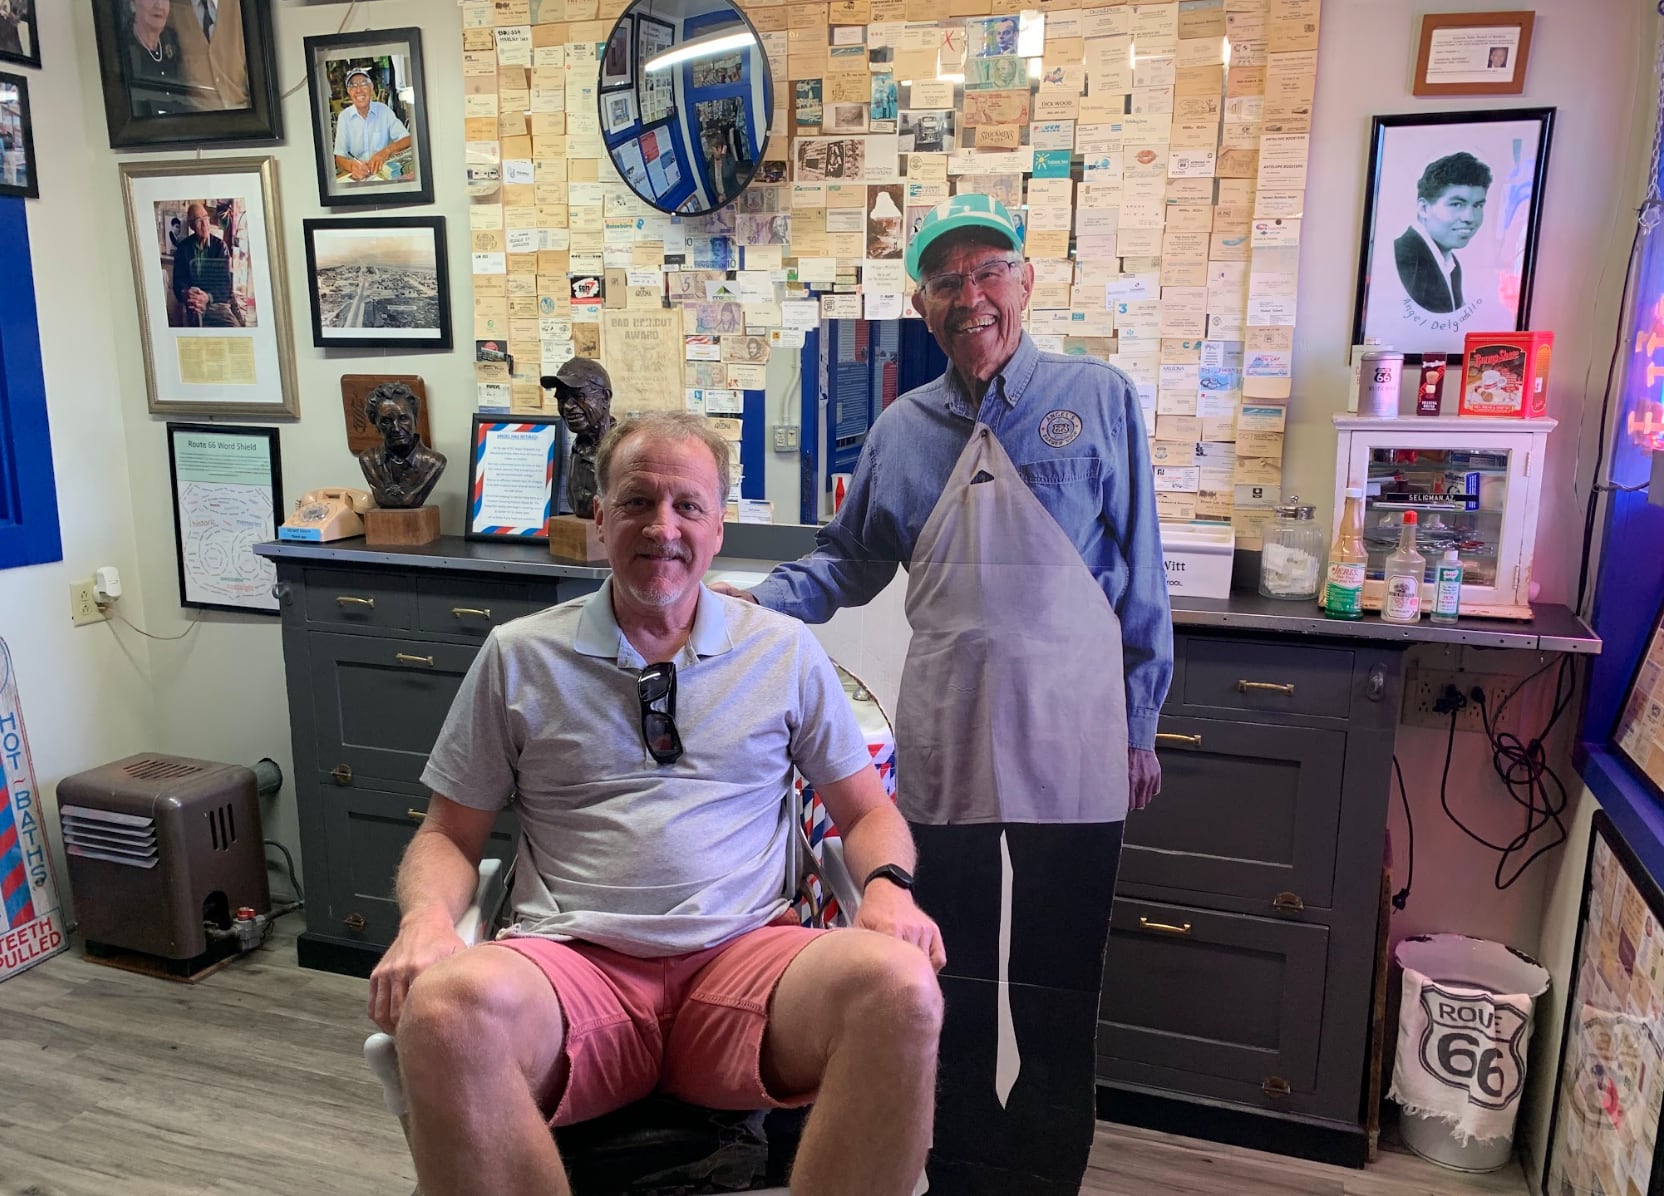 Scott visits 96 year old Angel Delgadillo, a famous barber on the mother road who has been dubbed the "guardian angel" of U.S. Route 66.